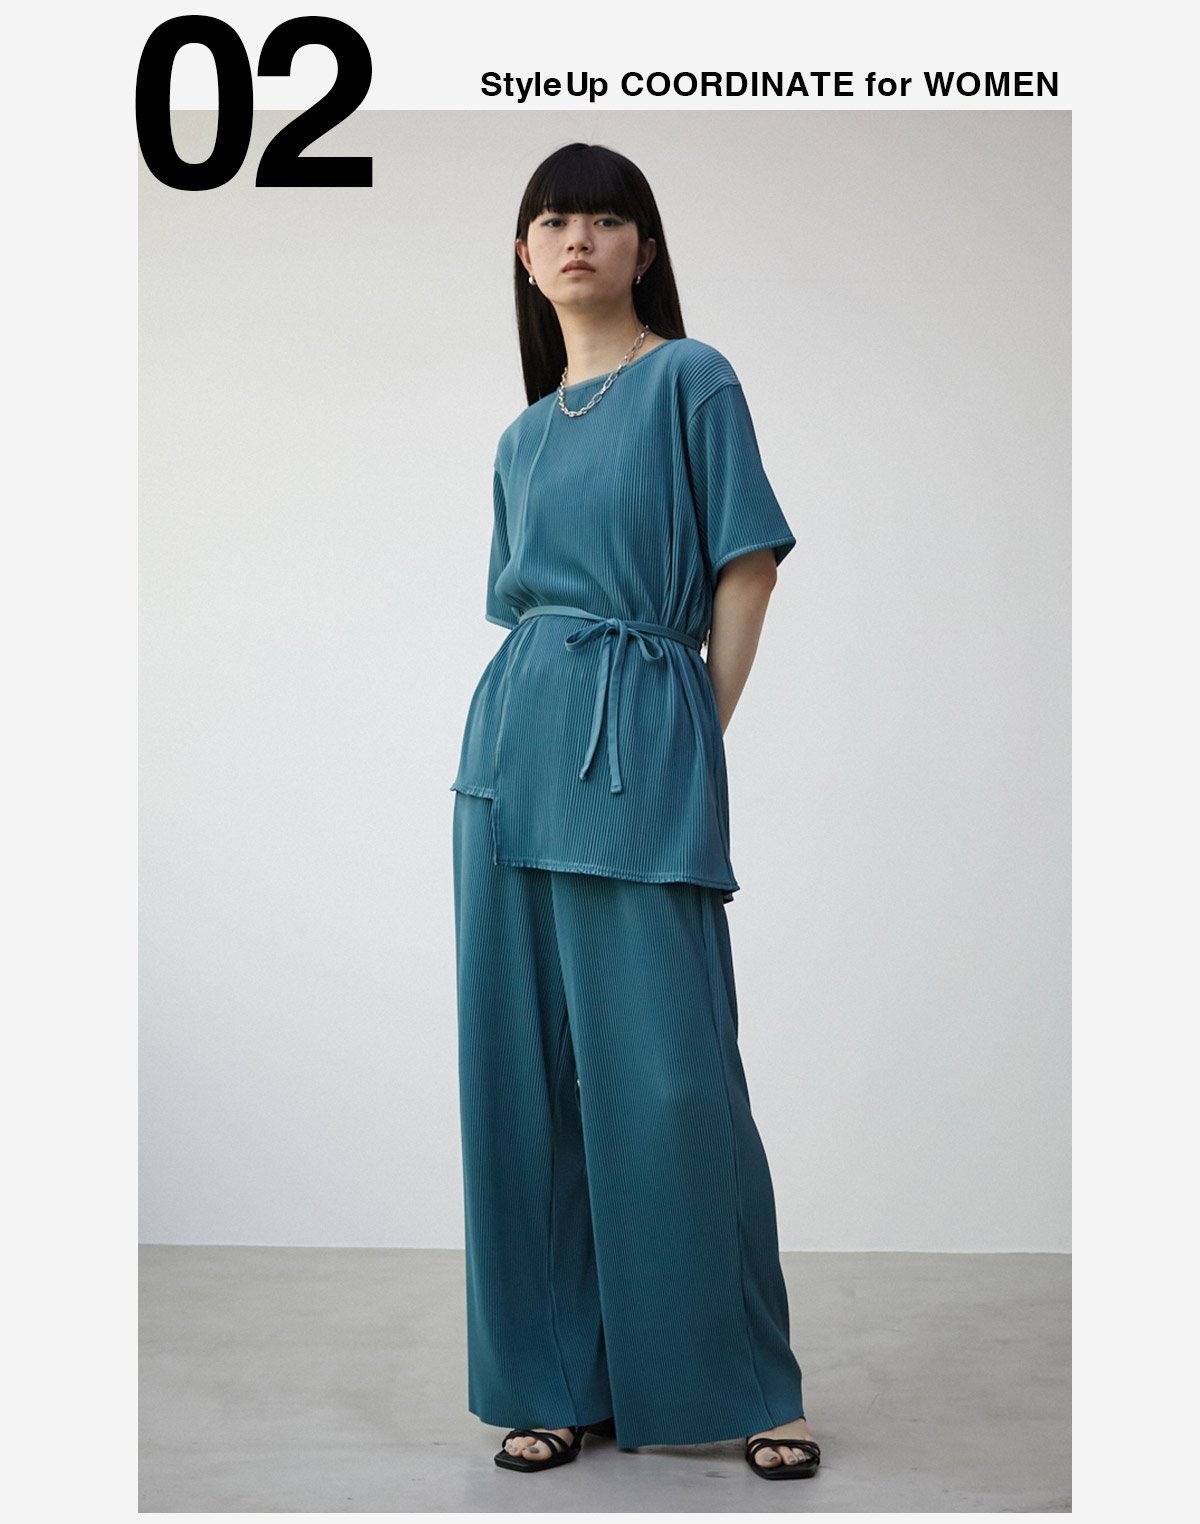 AZUL STYLE TECH. Style Up COORDINATE for WOMEN